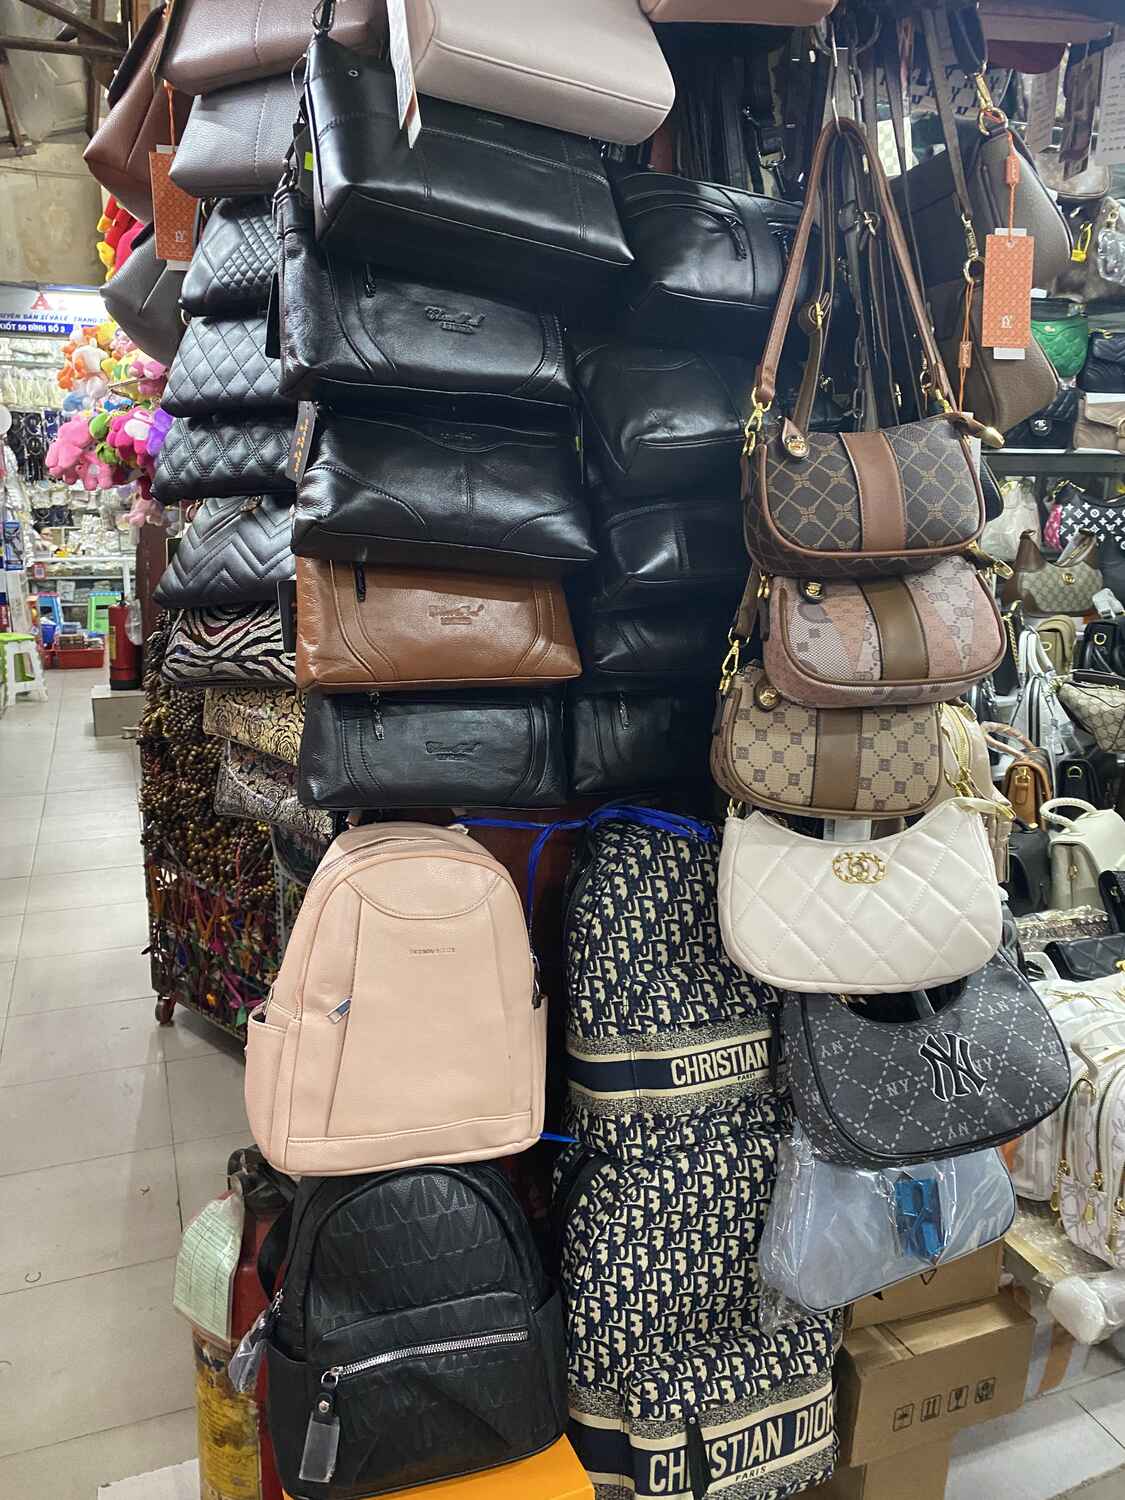 Bags for sale at the Cho Con Market in Da Nang